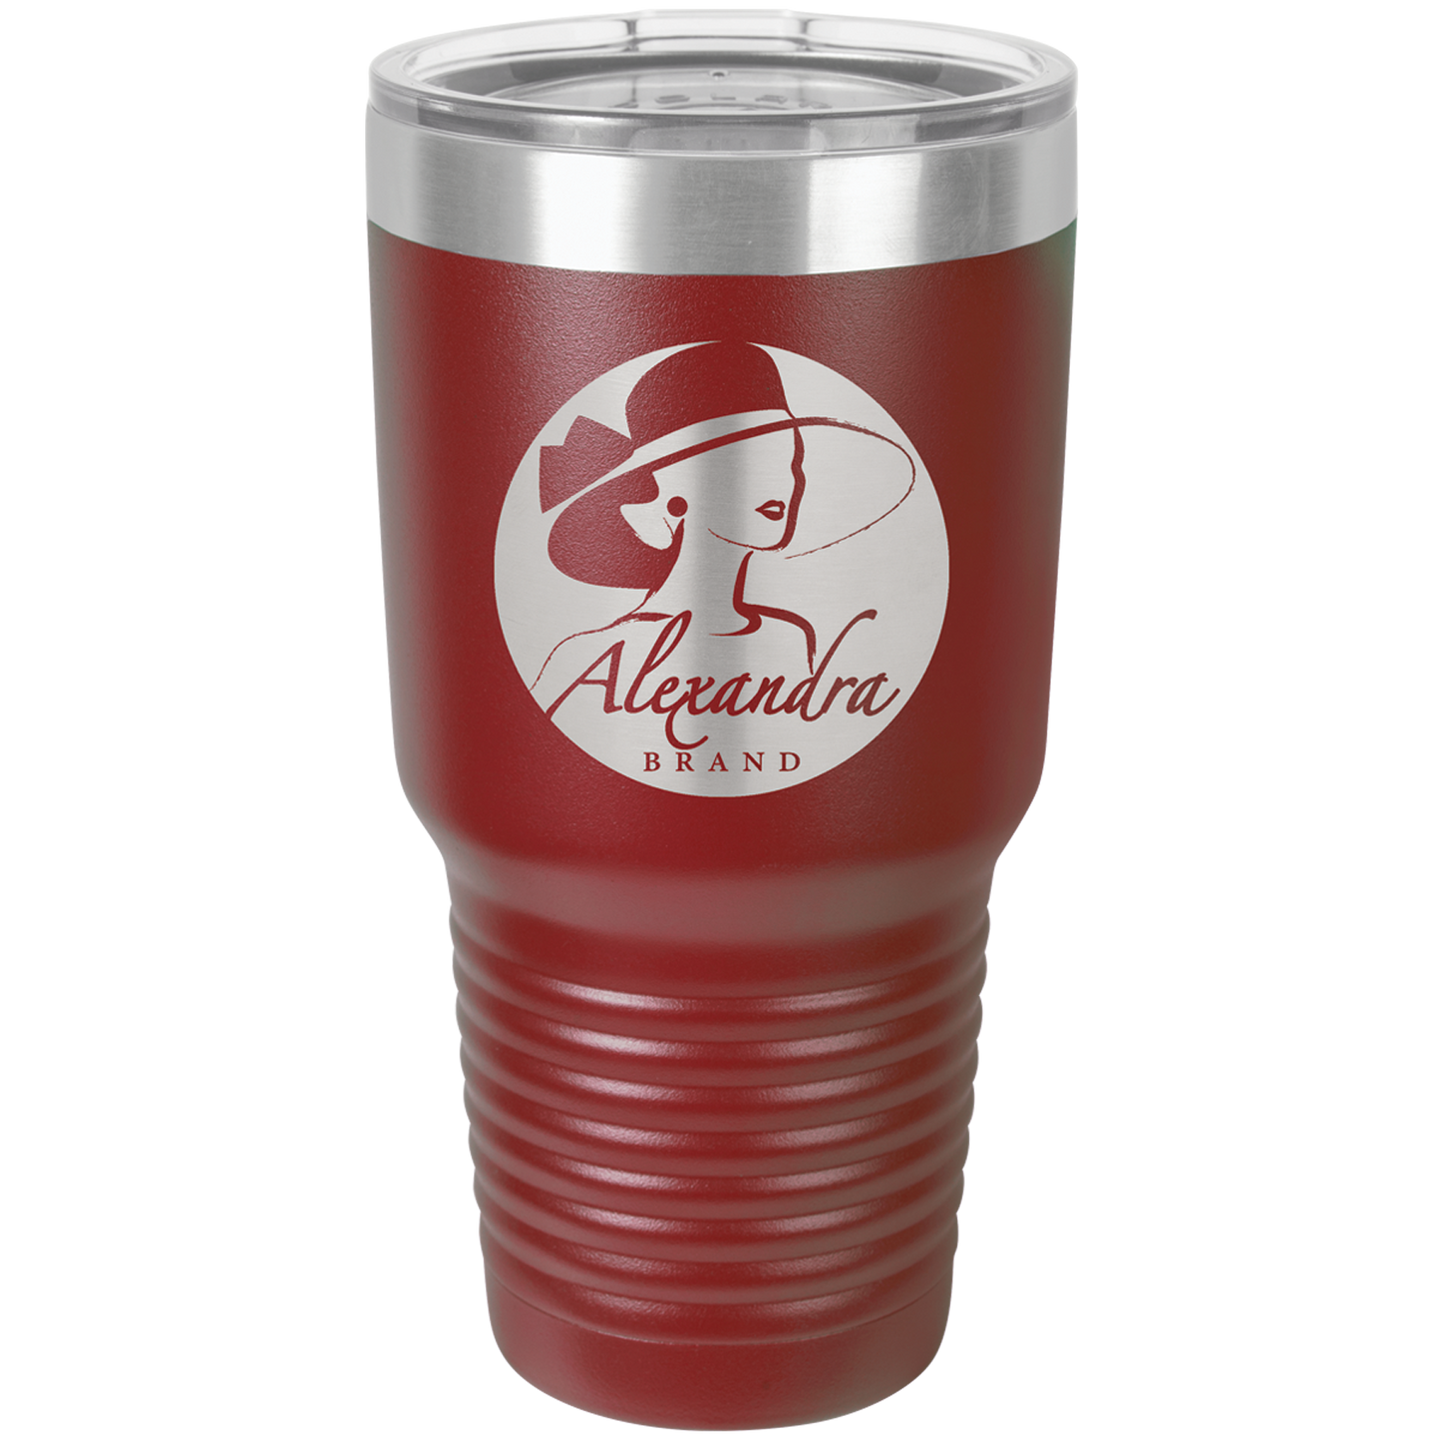 Custom Tumblers Engraved With Your Logo Or Design - Free Slider Lid Upgrade